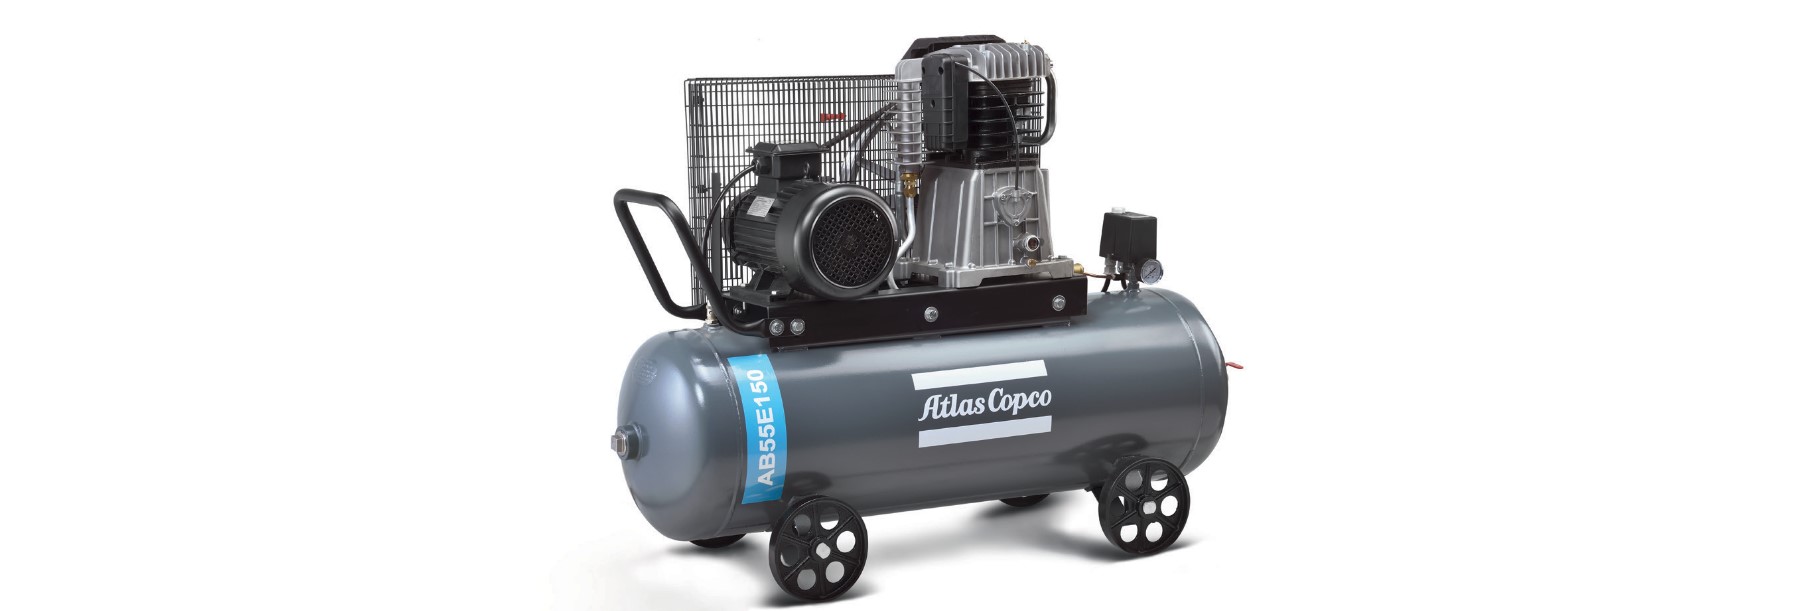 A picture of one Atlas Copco's products, a Piston Air Compressor, with the logo of Atlas Copco printed on the side